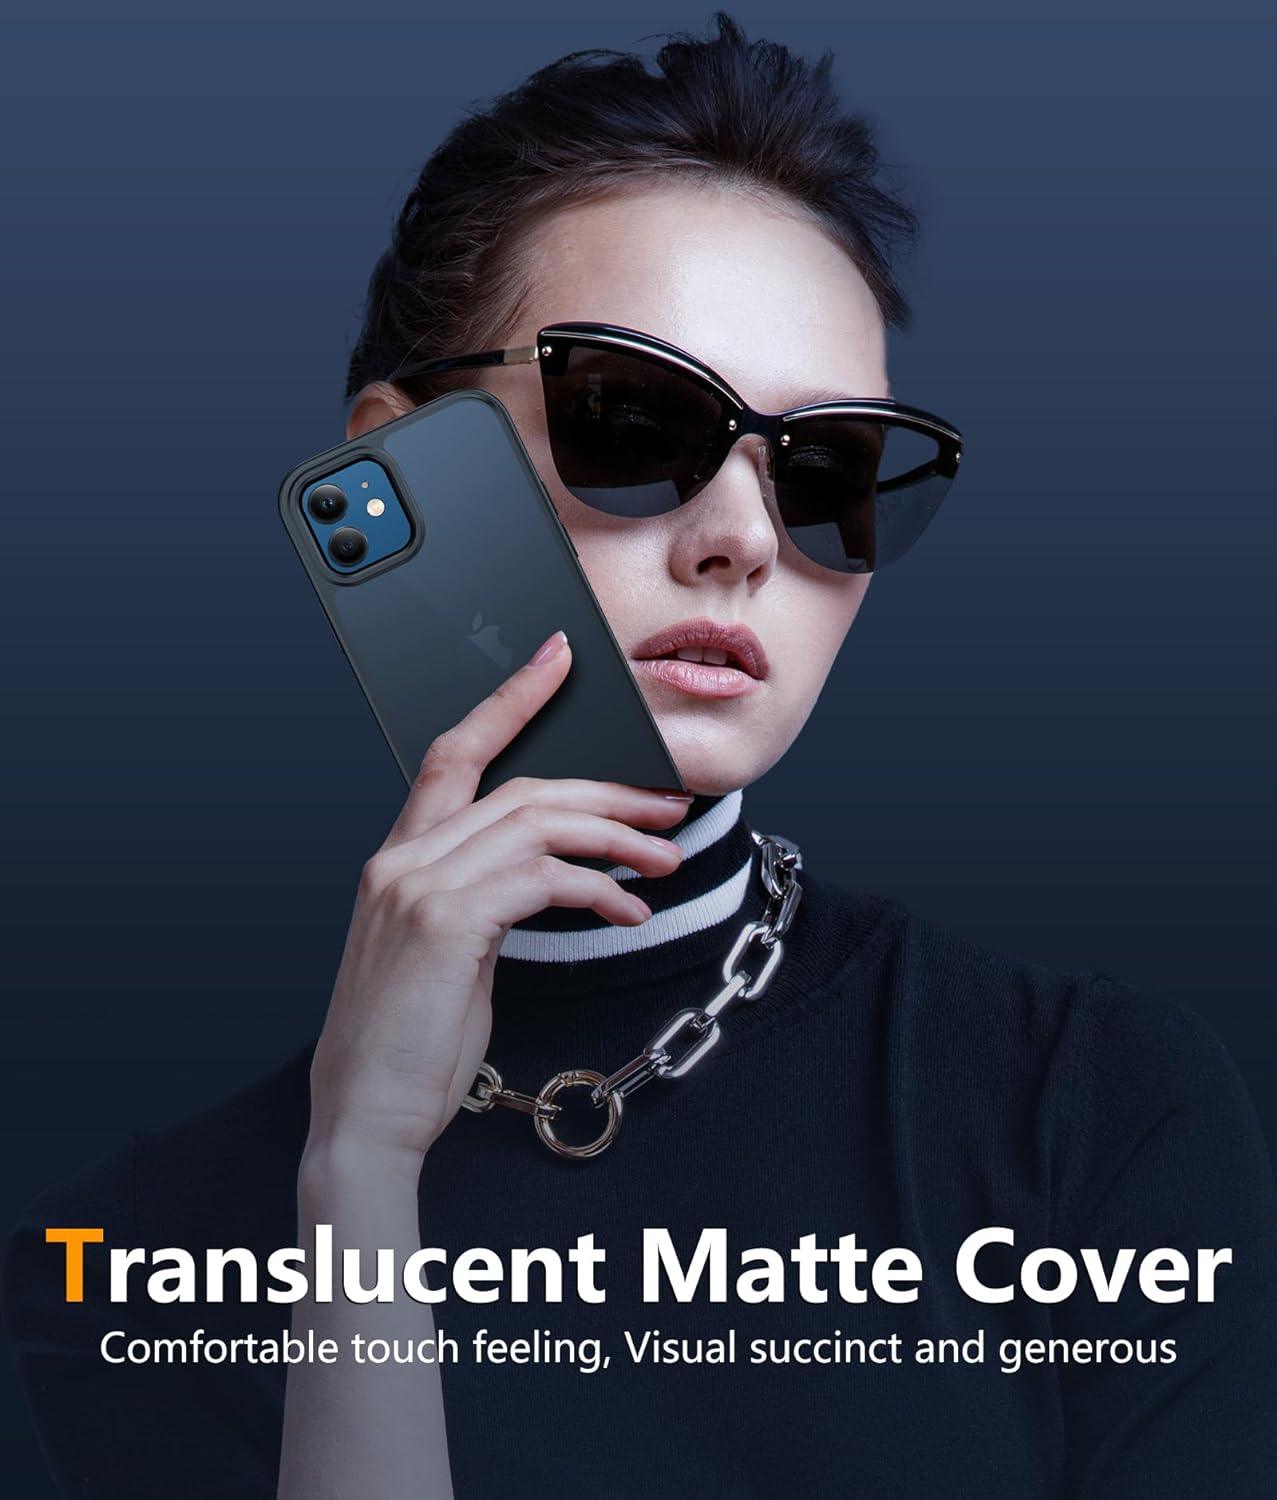 iPhone 12 Case: Military Grade Shockproof Translucent Matte Case Rugged Full Body Drop Protection - FNTCASE OFFICIAL